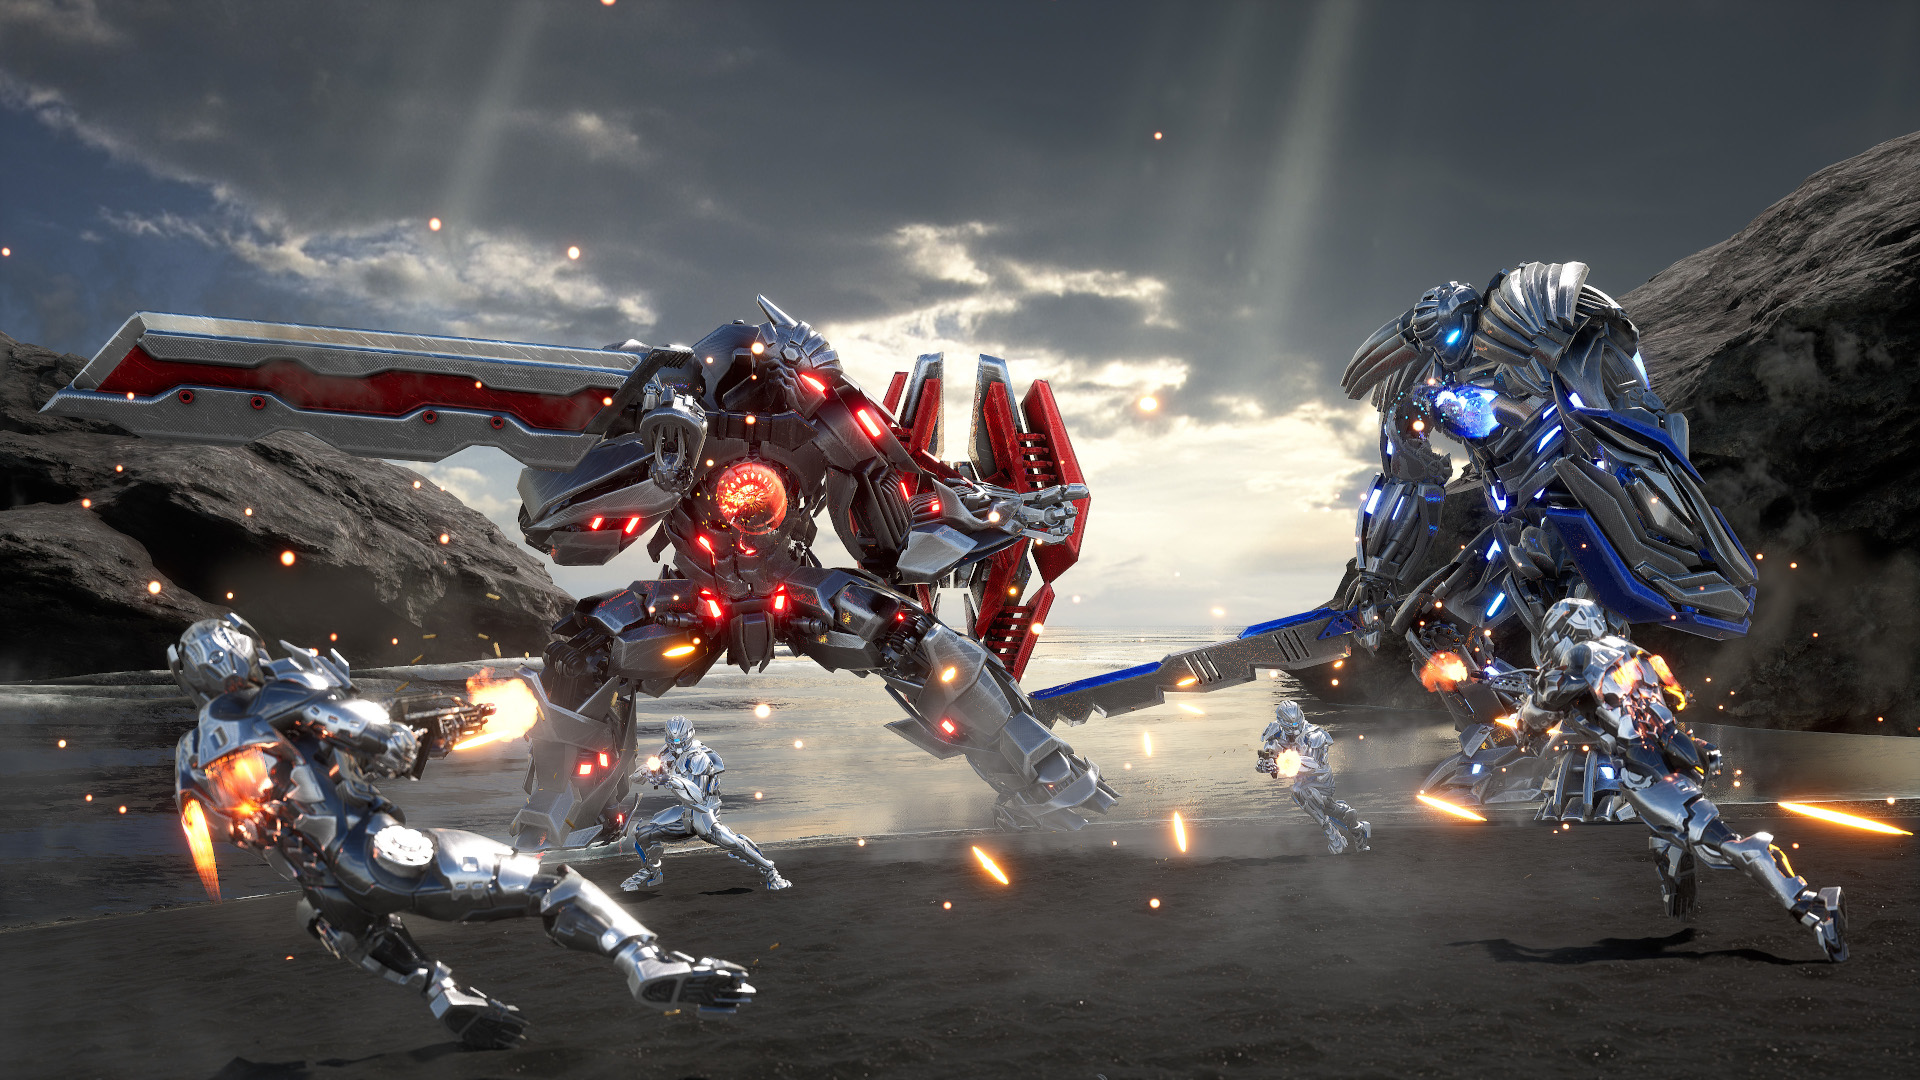 Exomecha release date: Two large mechs fighting with smaller soldiers running in-between them.